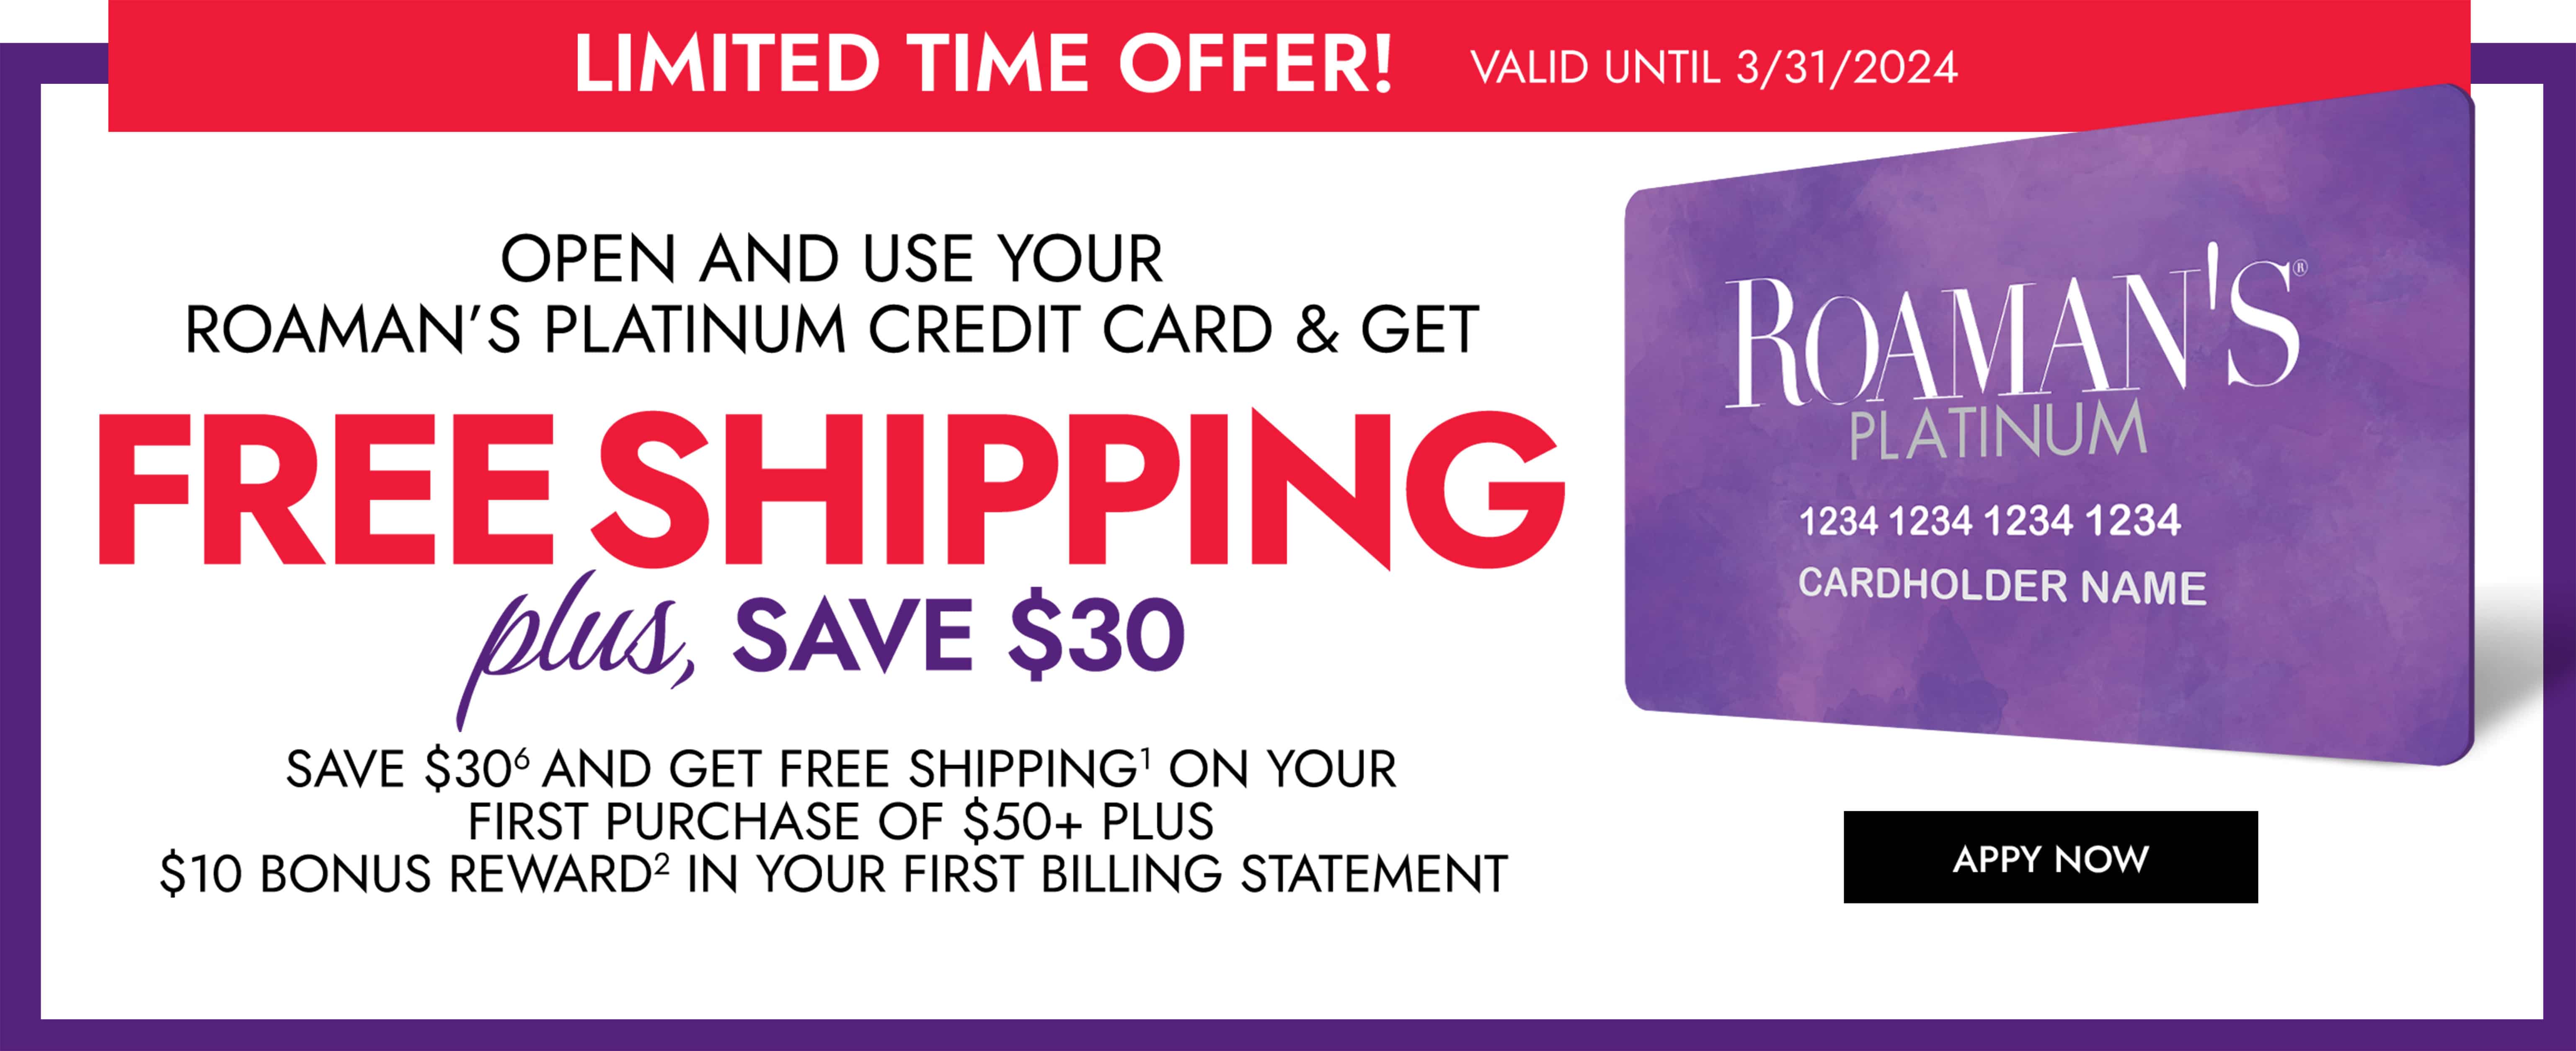 Limited time offer! Free shipping plus save $30 with Roaman's Platinum Credit Card